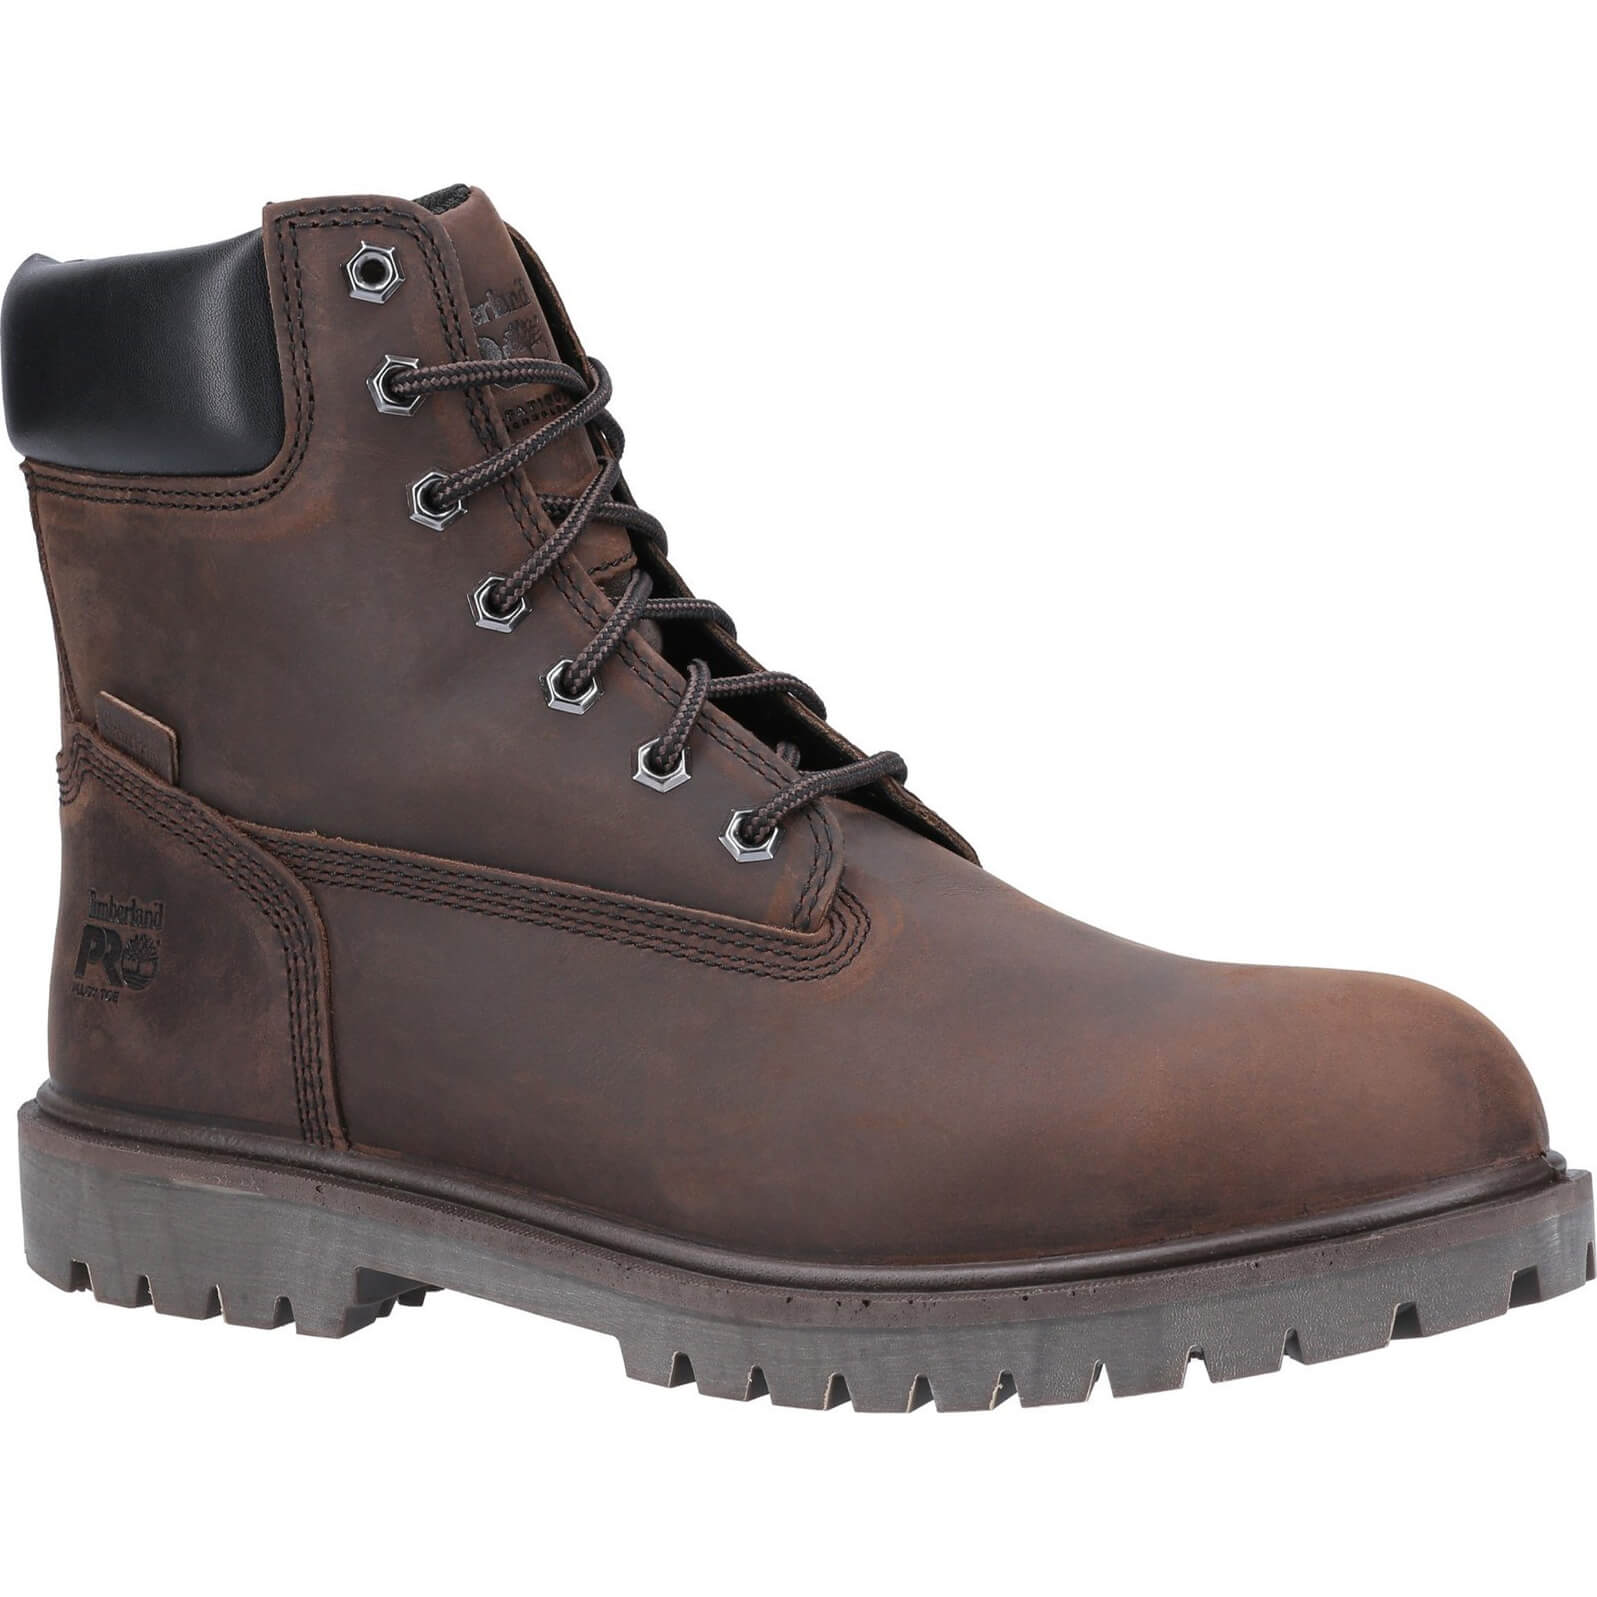 Image of Timberland Pro Iconic Safety Toe Work Boot Brown Size 10